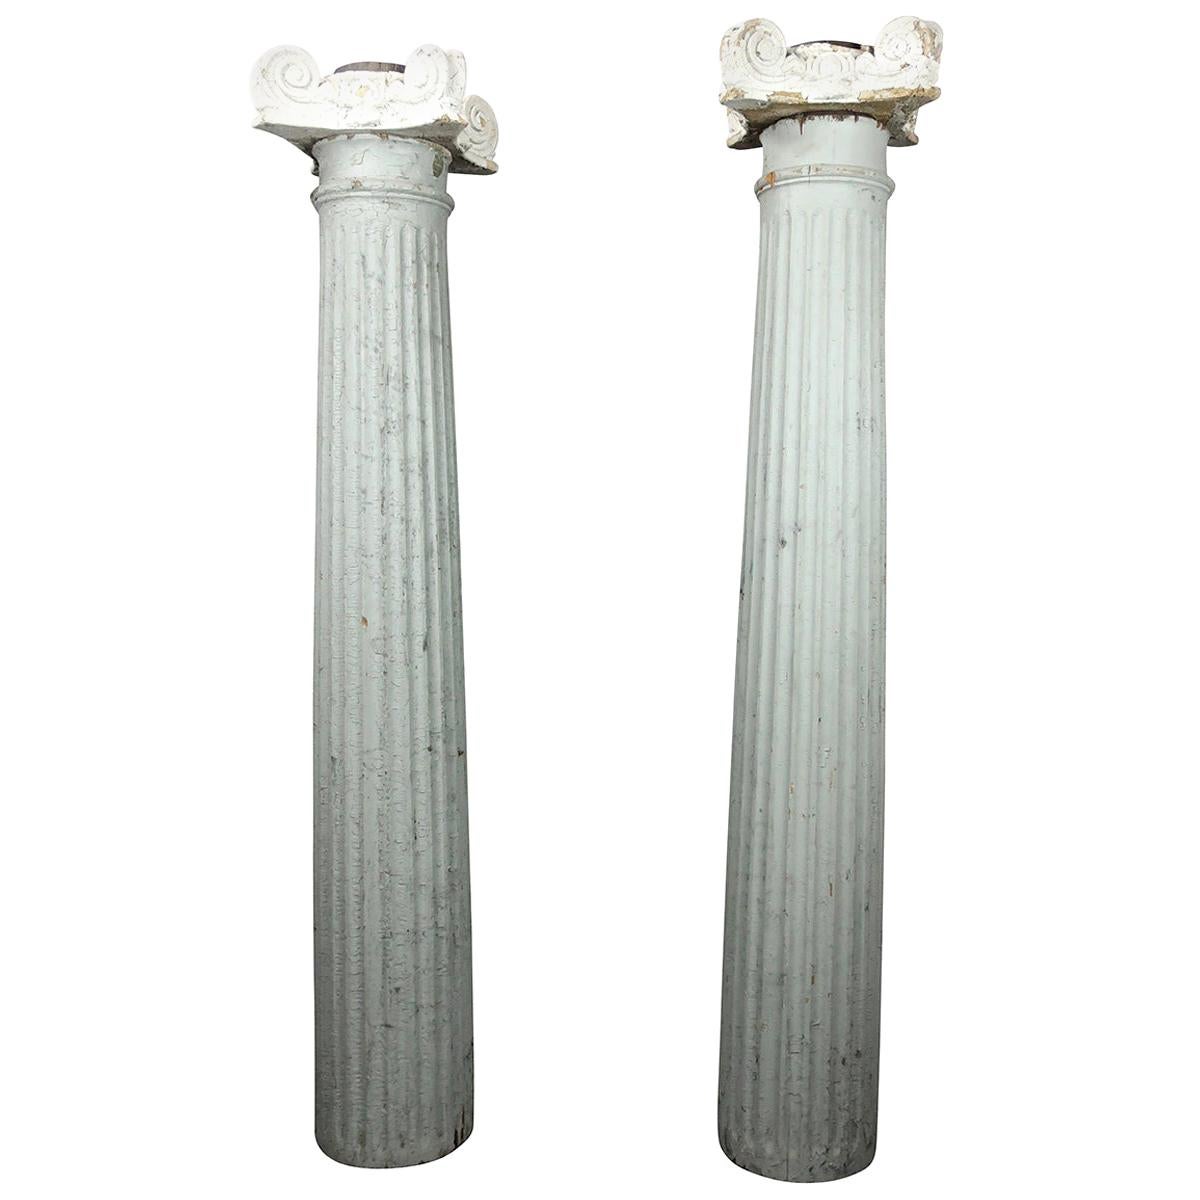 Details about   4 ANTIQUE SOLID WOOD REEDED 9 FOOT ARCHITECTURAL COLUMNS AND 1 HALF COLUMN 